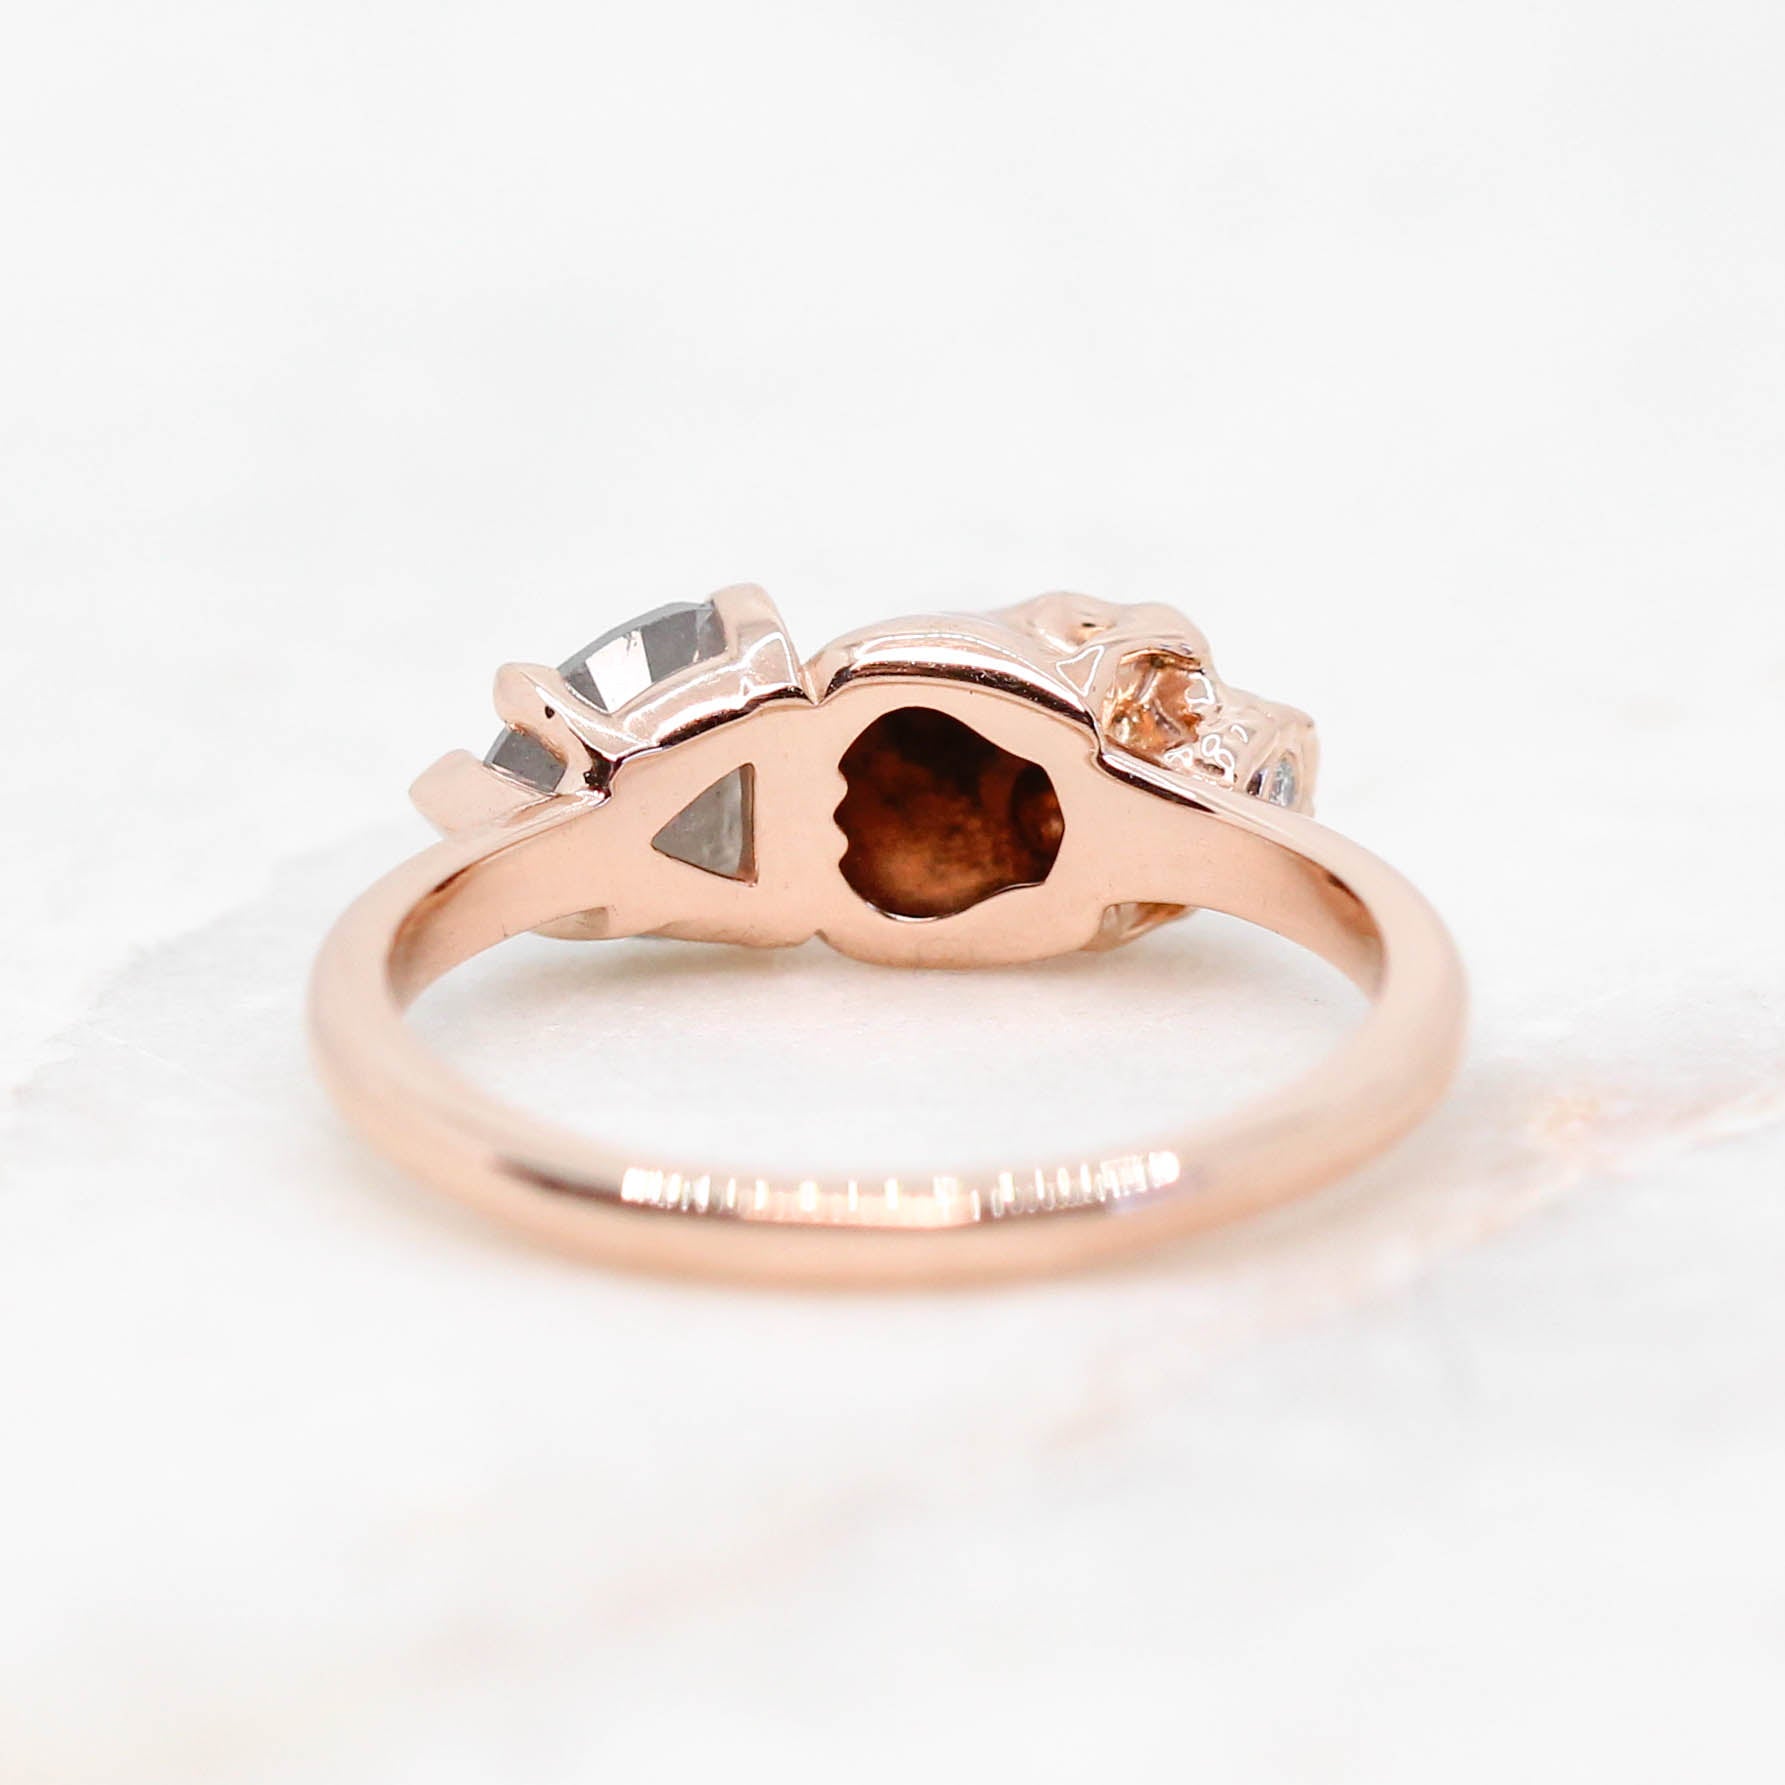 Skull Ring with a 0.83 Misty Gray Heart-Shaped Diamond and Hidden Diamond in 14k Rose Gold - Ready to Size and Ship - Midwinter Co. Alternative Bridal Rings and Modern Fine Jewelry